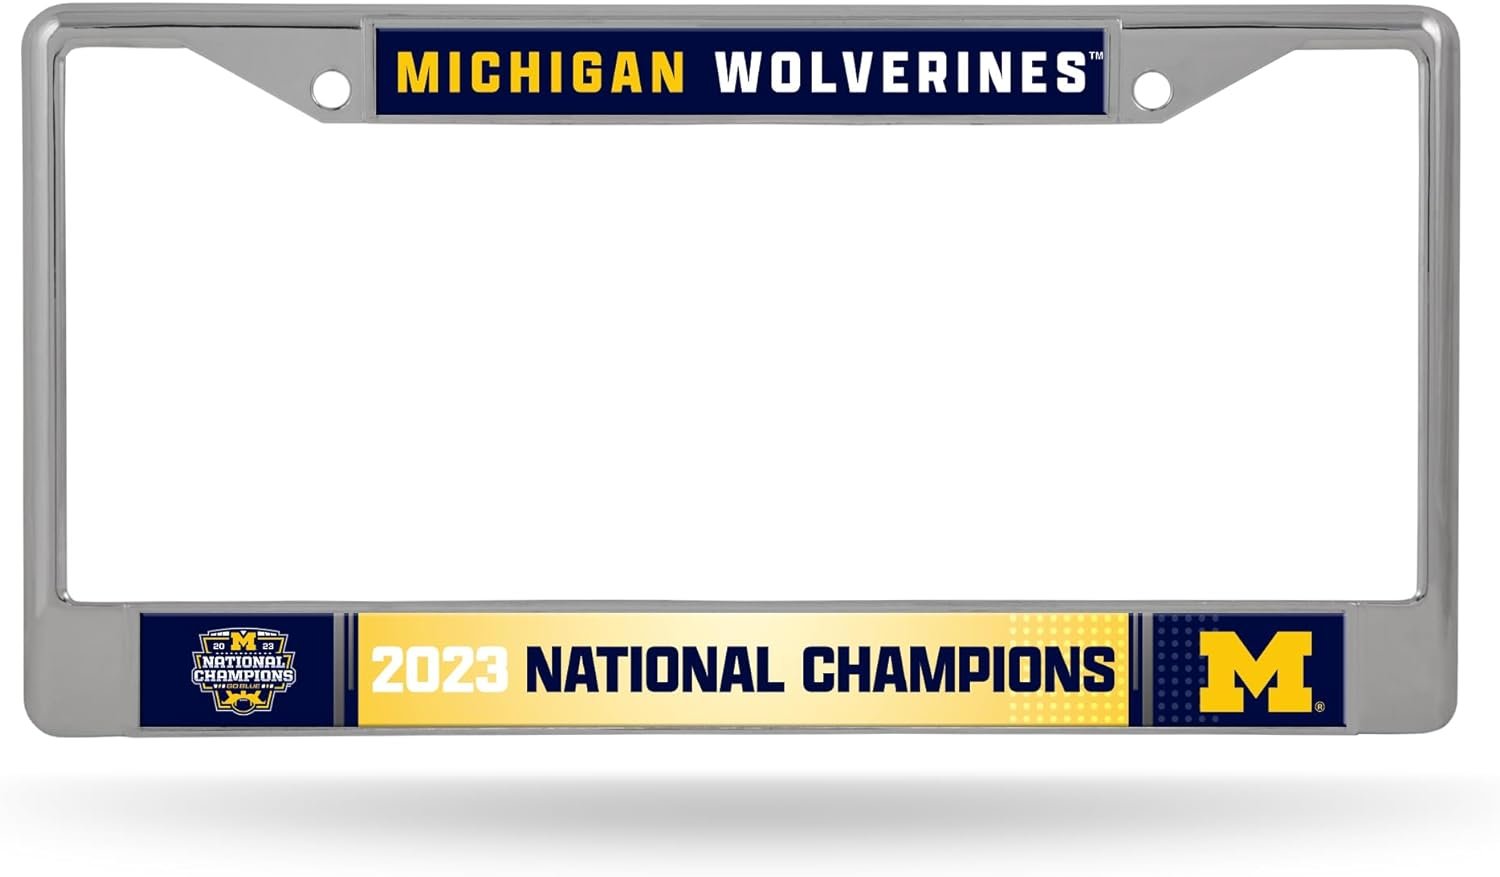 University of Michigan Wolverines 2024 Champions Chrome Metal License Plate Tag Frame Cover, 12x6 Inch